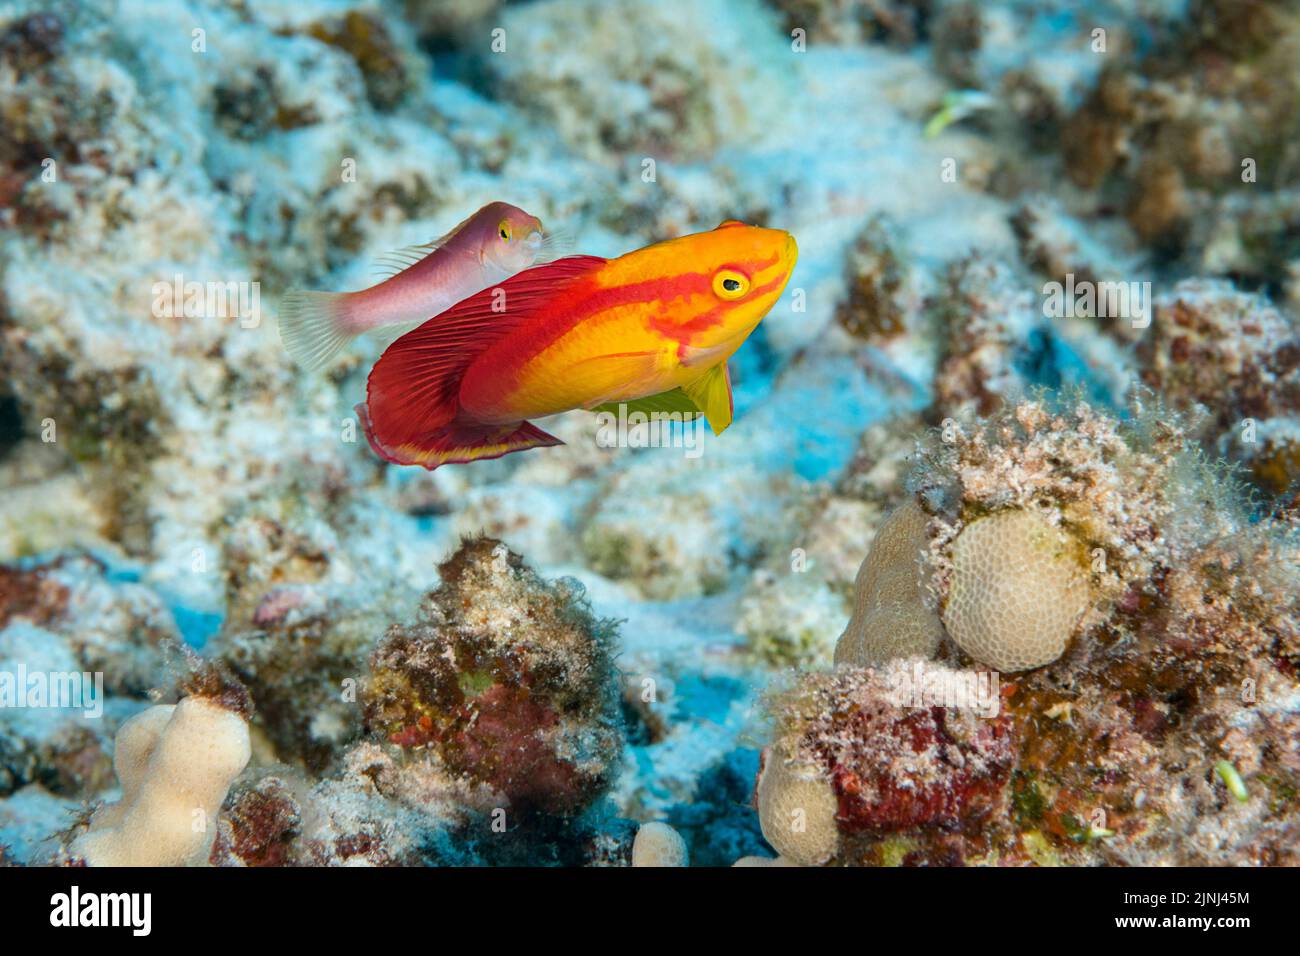 flame wrasse, Cirrhilabrus jordani ( endemic species ), male flaring fins while being cleaned by a female pencil wrasse, Pseudojuloides cerasinus; Koh Stock Photo